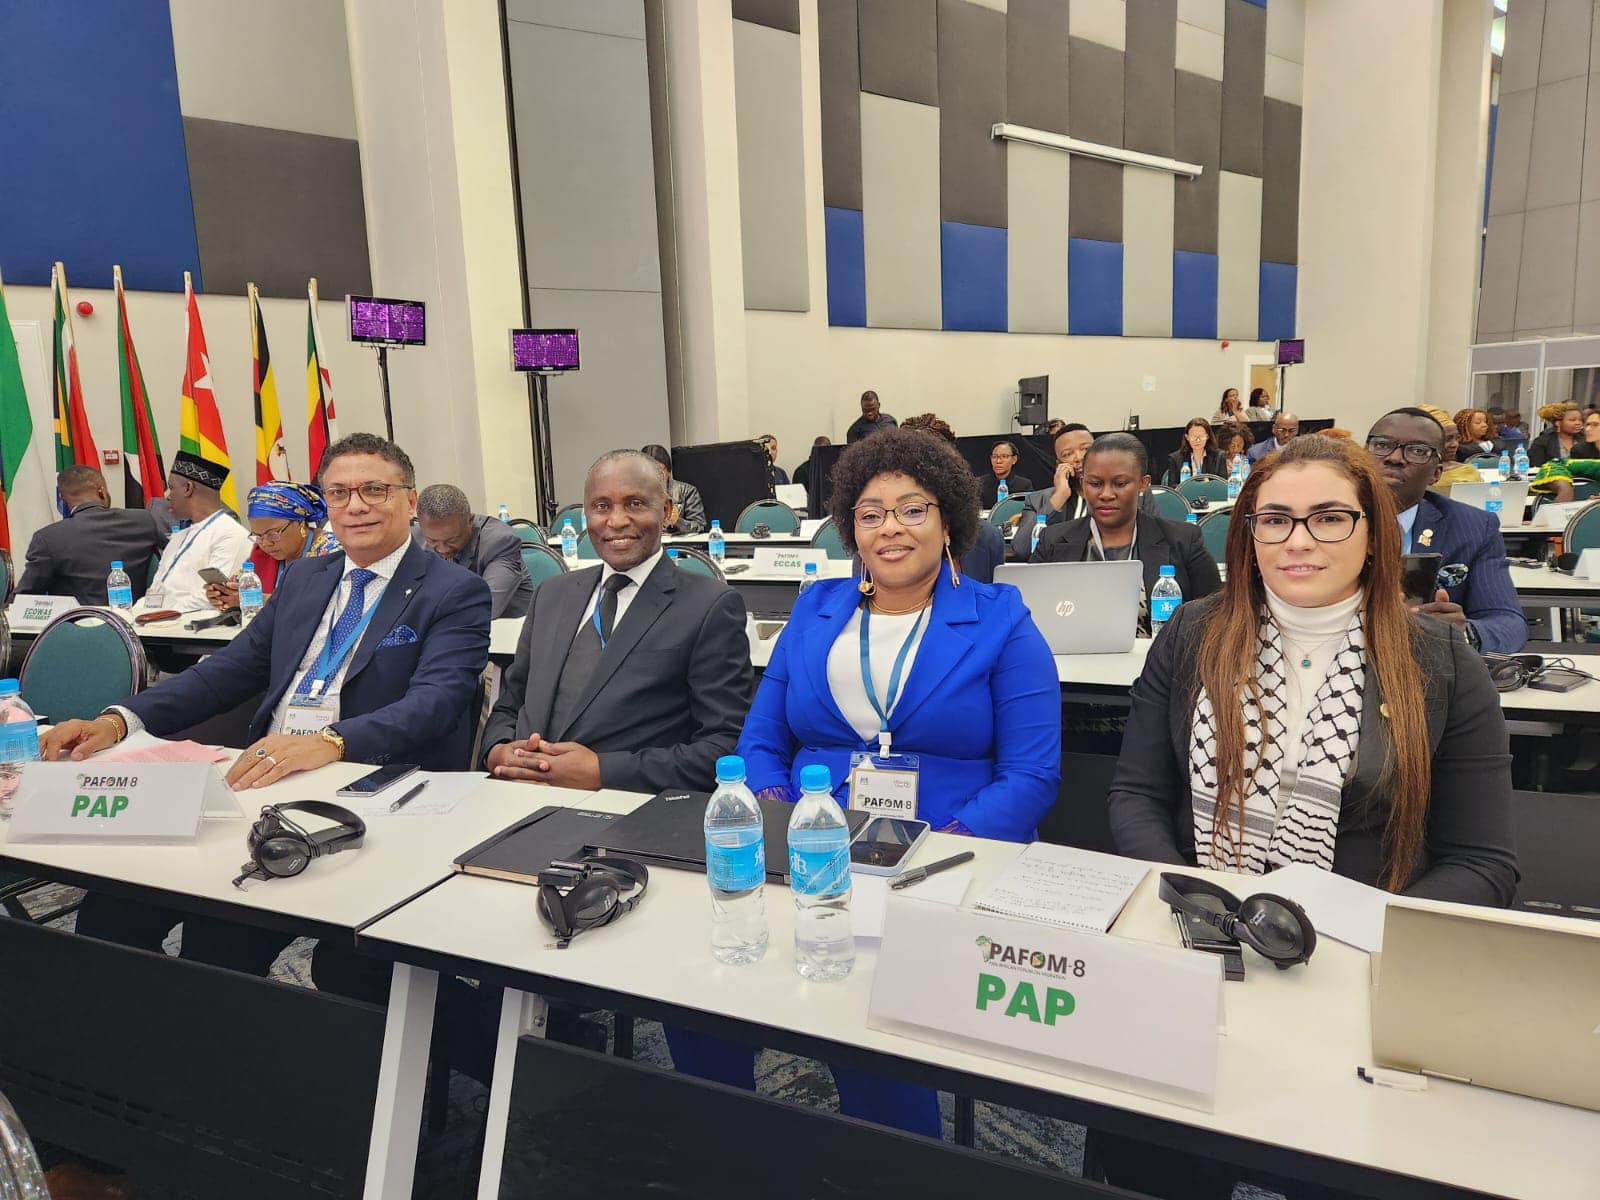 PAP in Gaborone for Conference on Free Movement of persons in Africa